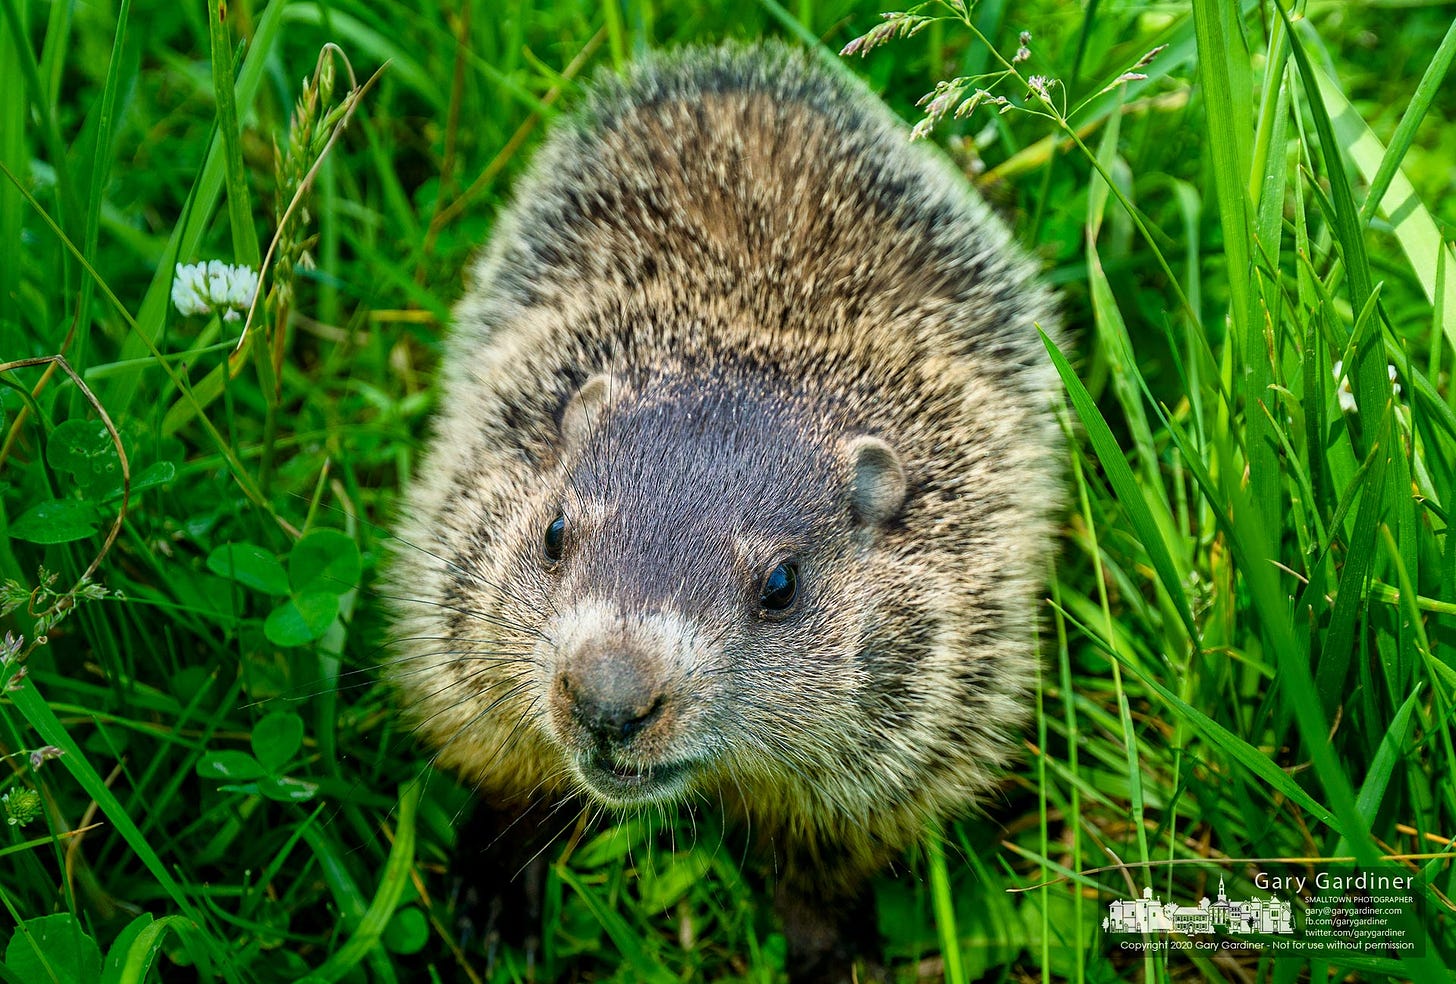 A groundhog stands it's ground when interrupted in a well-worn pathway through overgrown grass in the yard at the Braun Farm. My Final Photo for June 1, 2020.